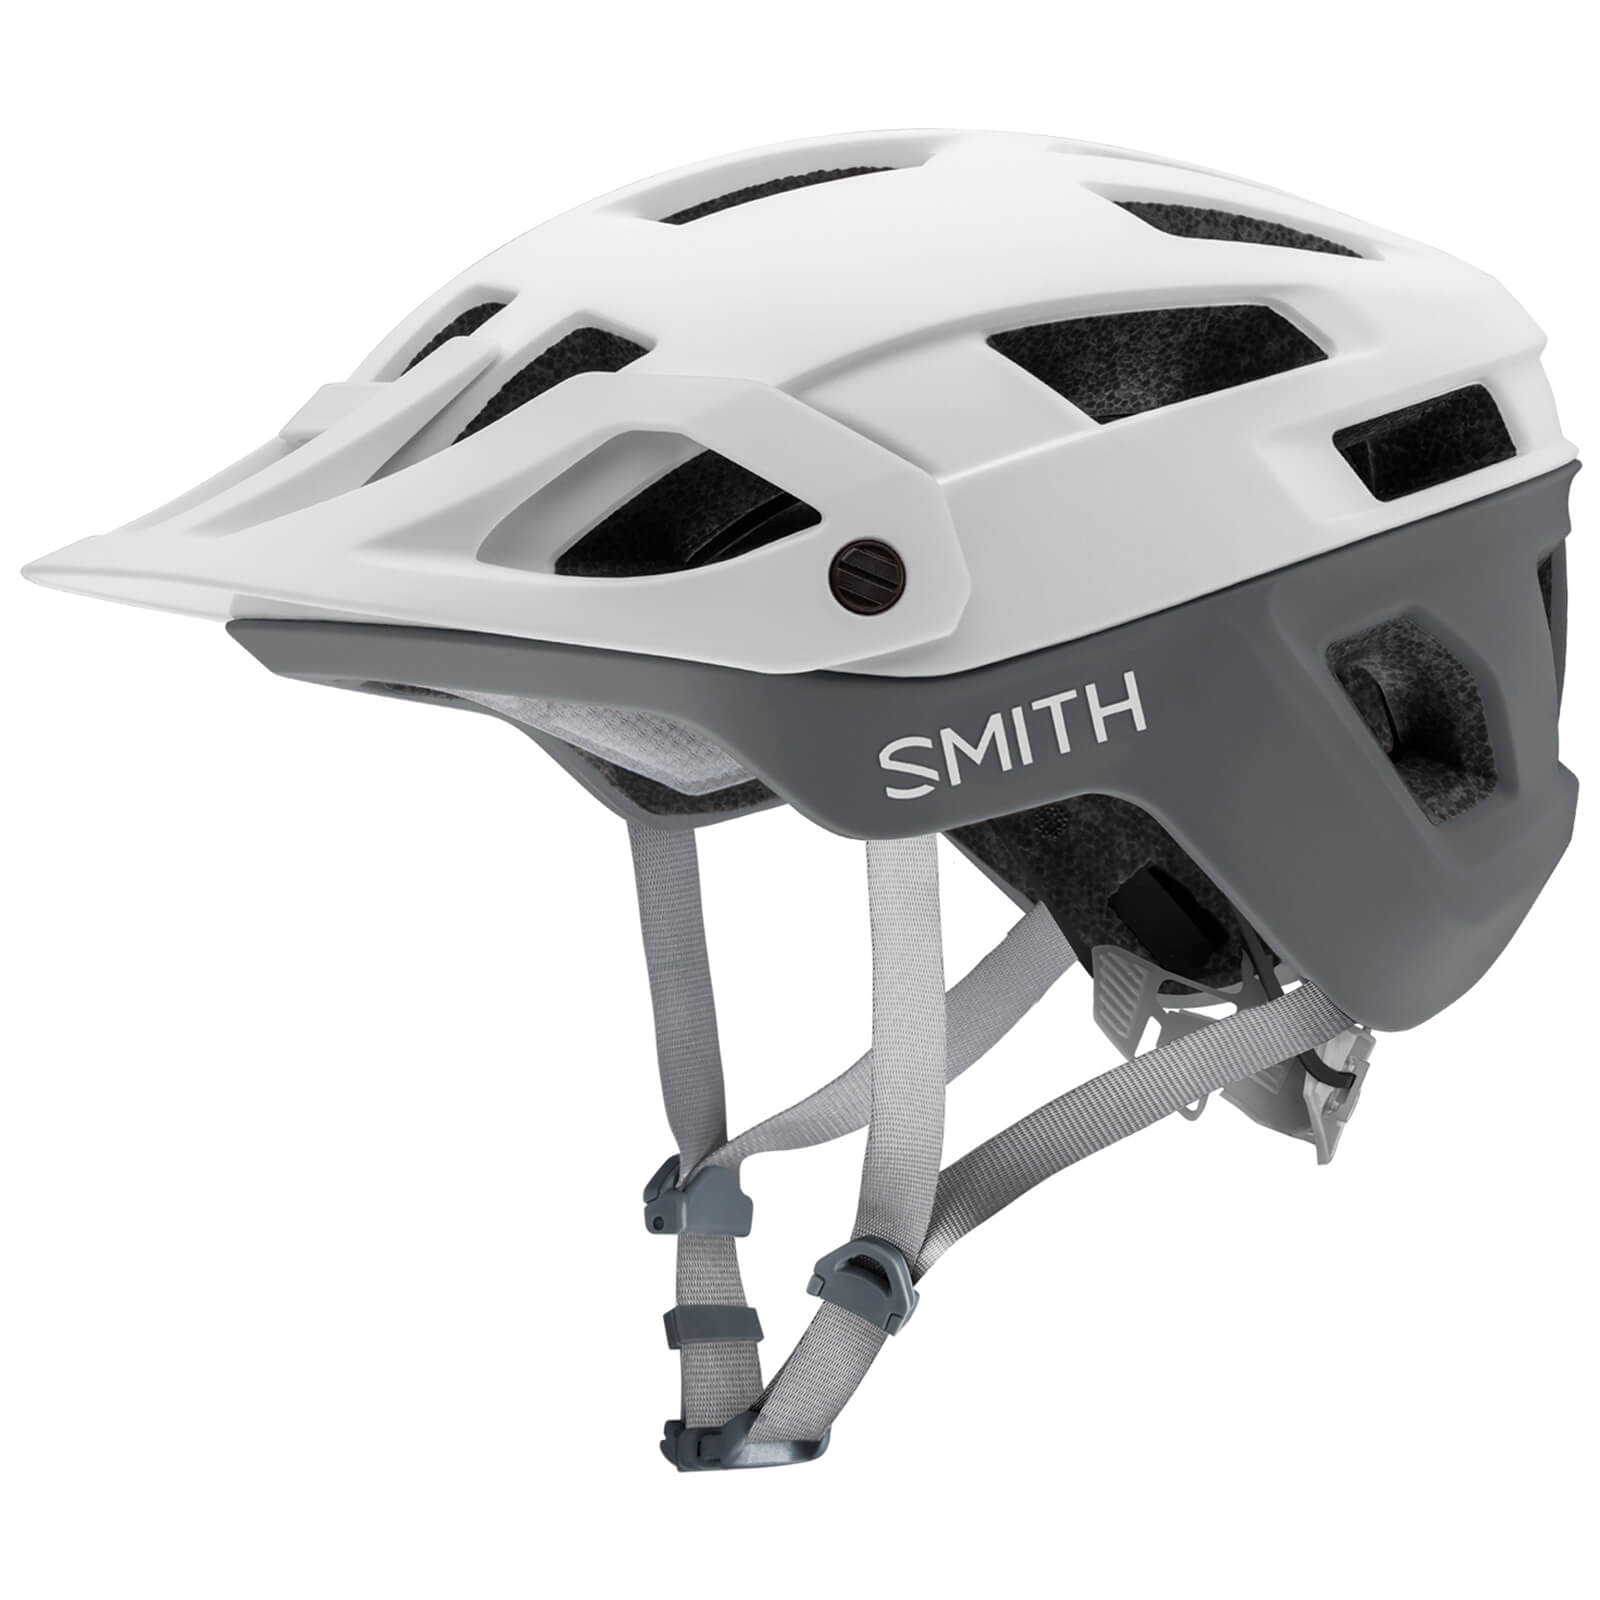 Smith Engage MIPS MTB Helmet - Small - Matte White Cement